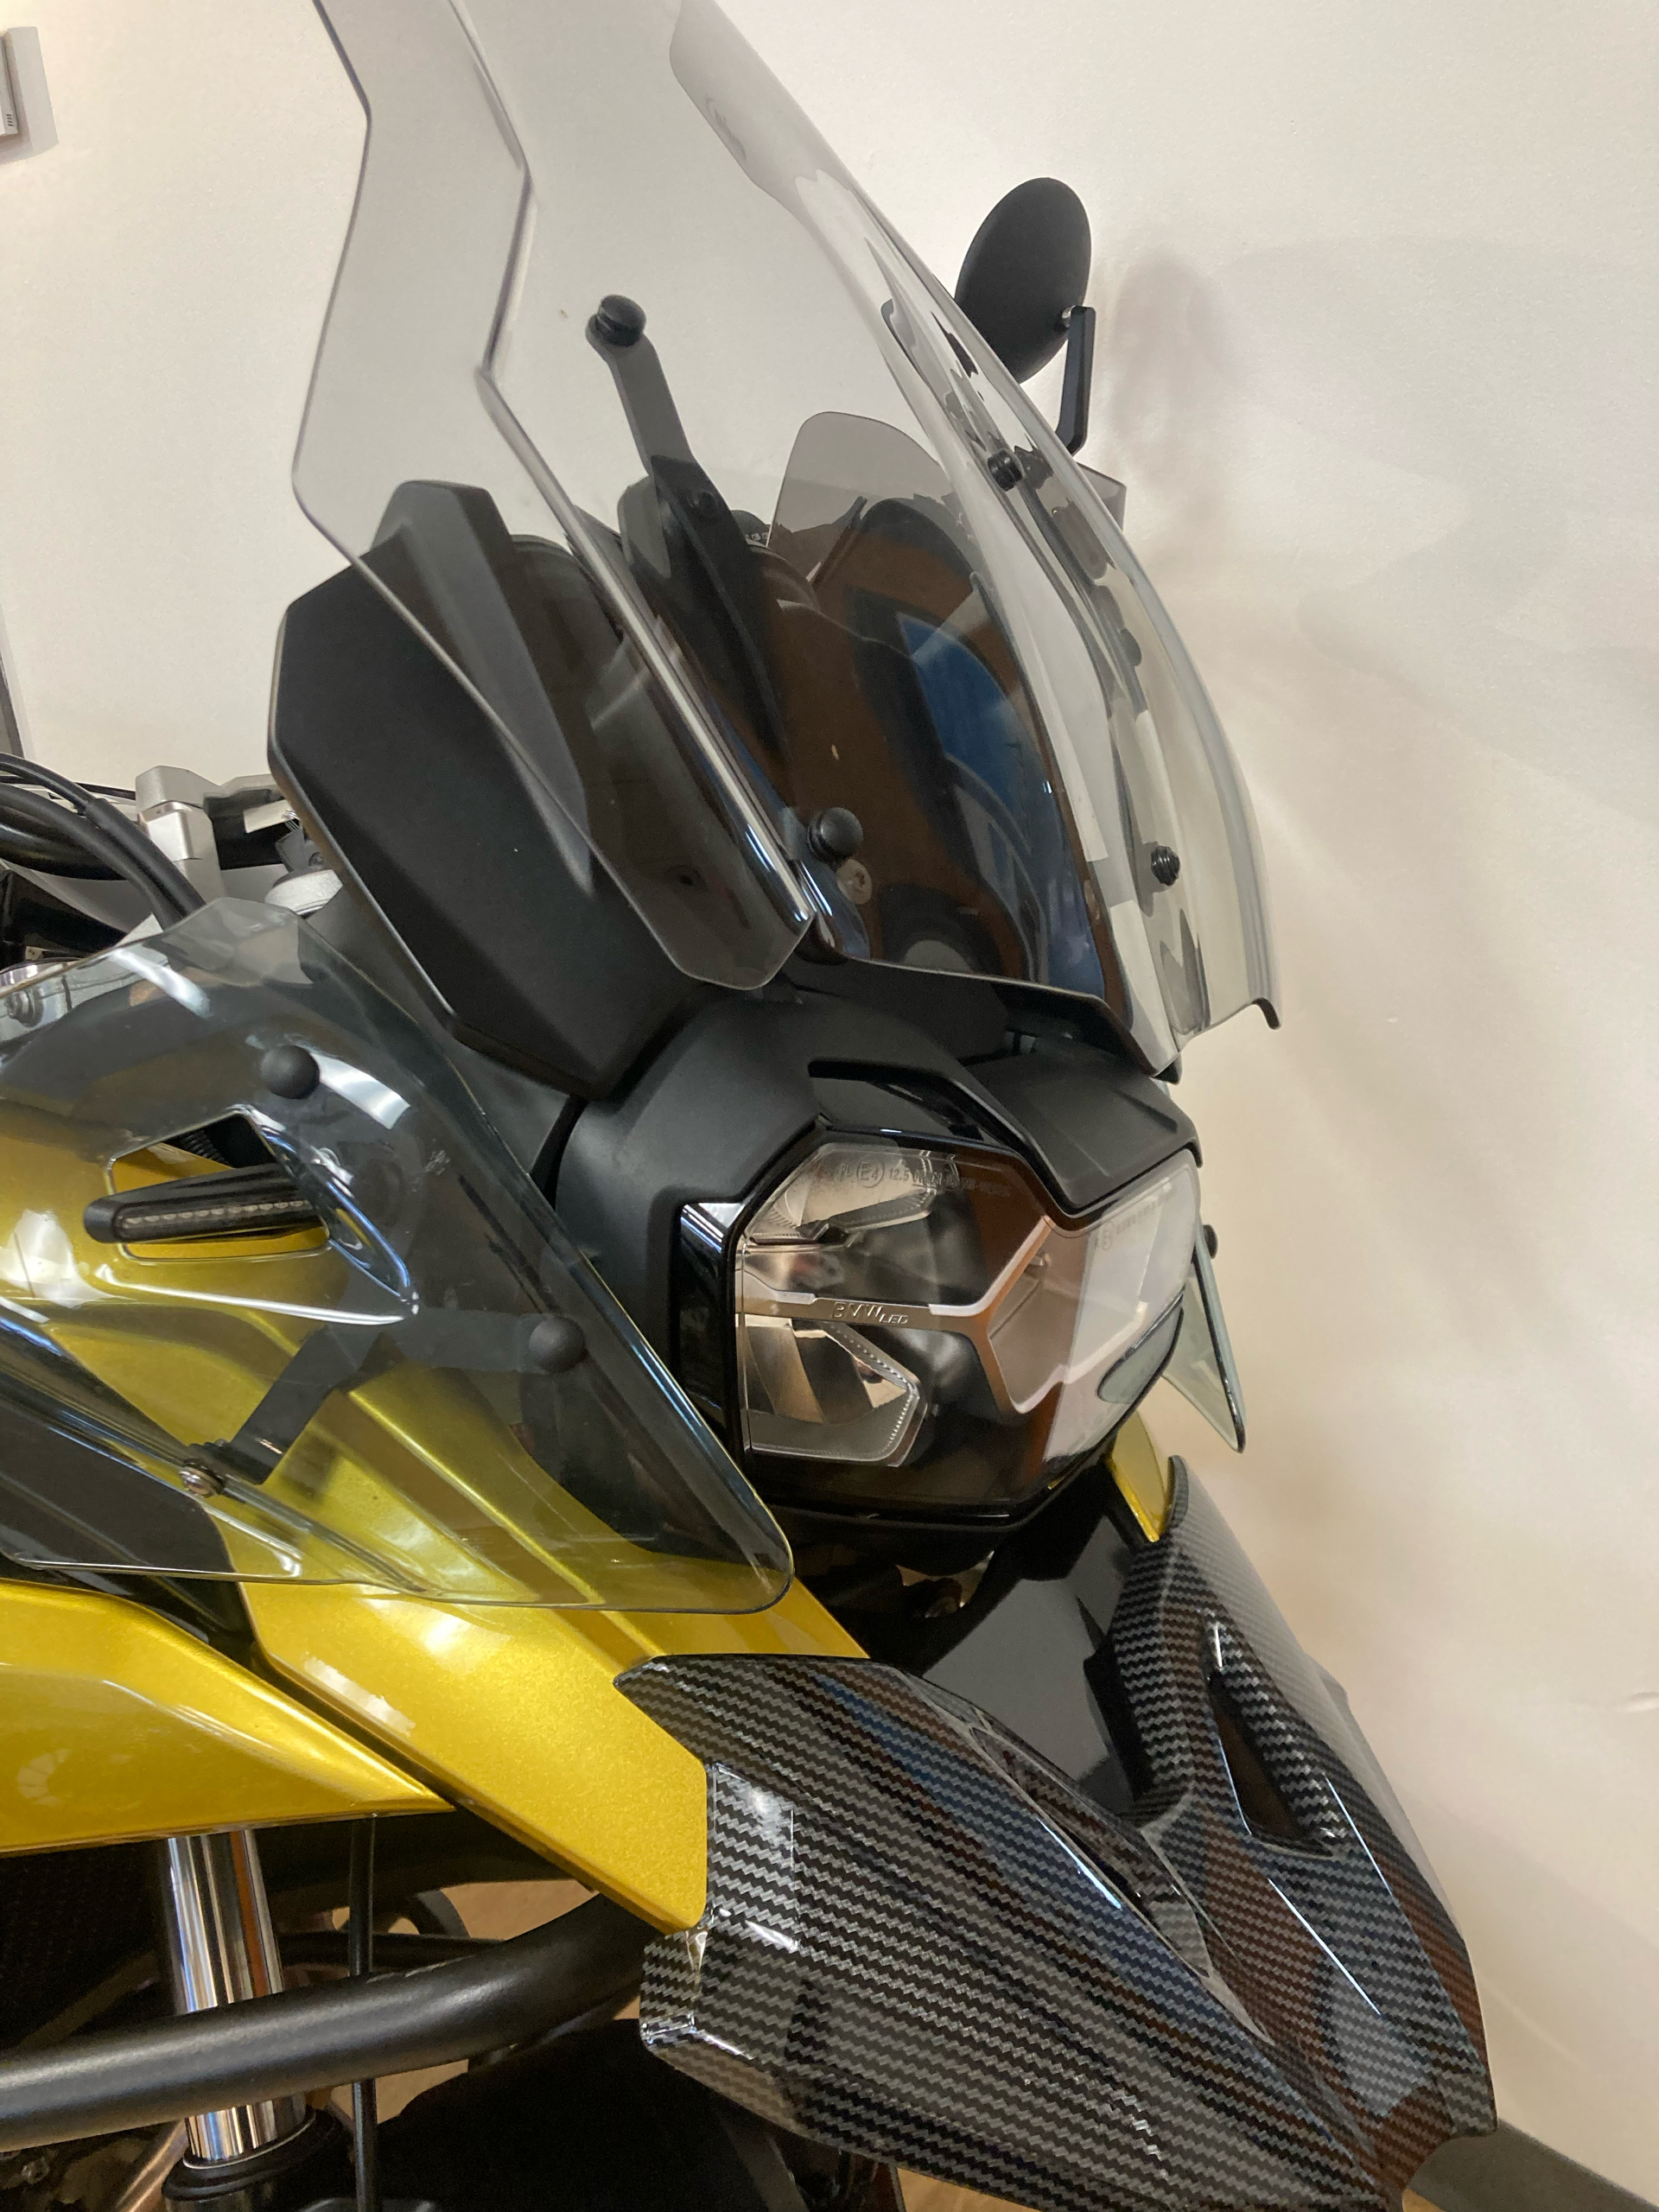 2020 BMW F 750 GS in Mahwah, New Jersey - Photo 10